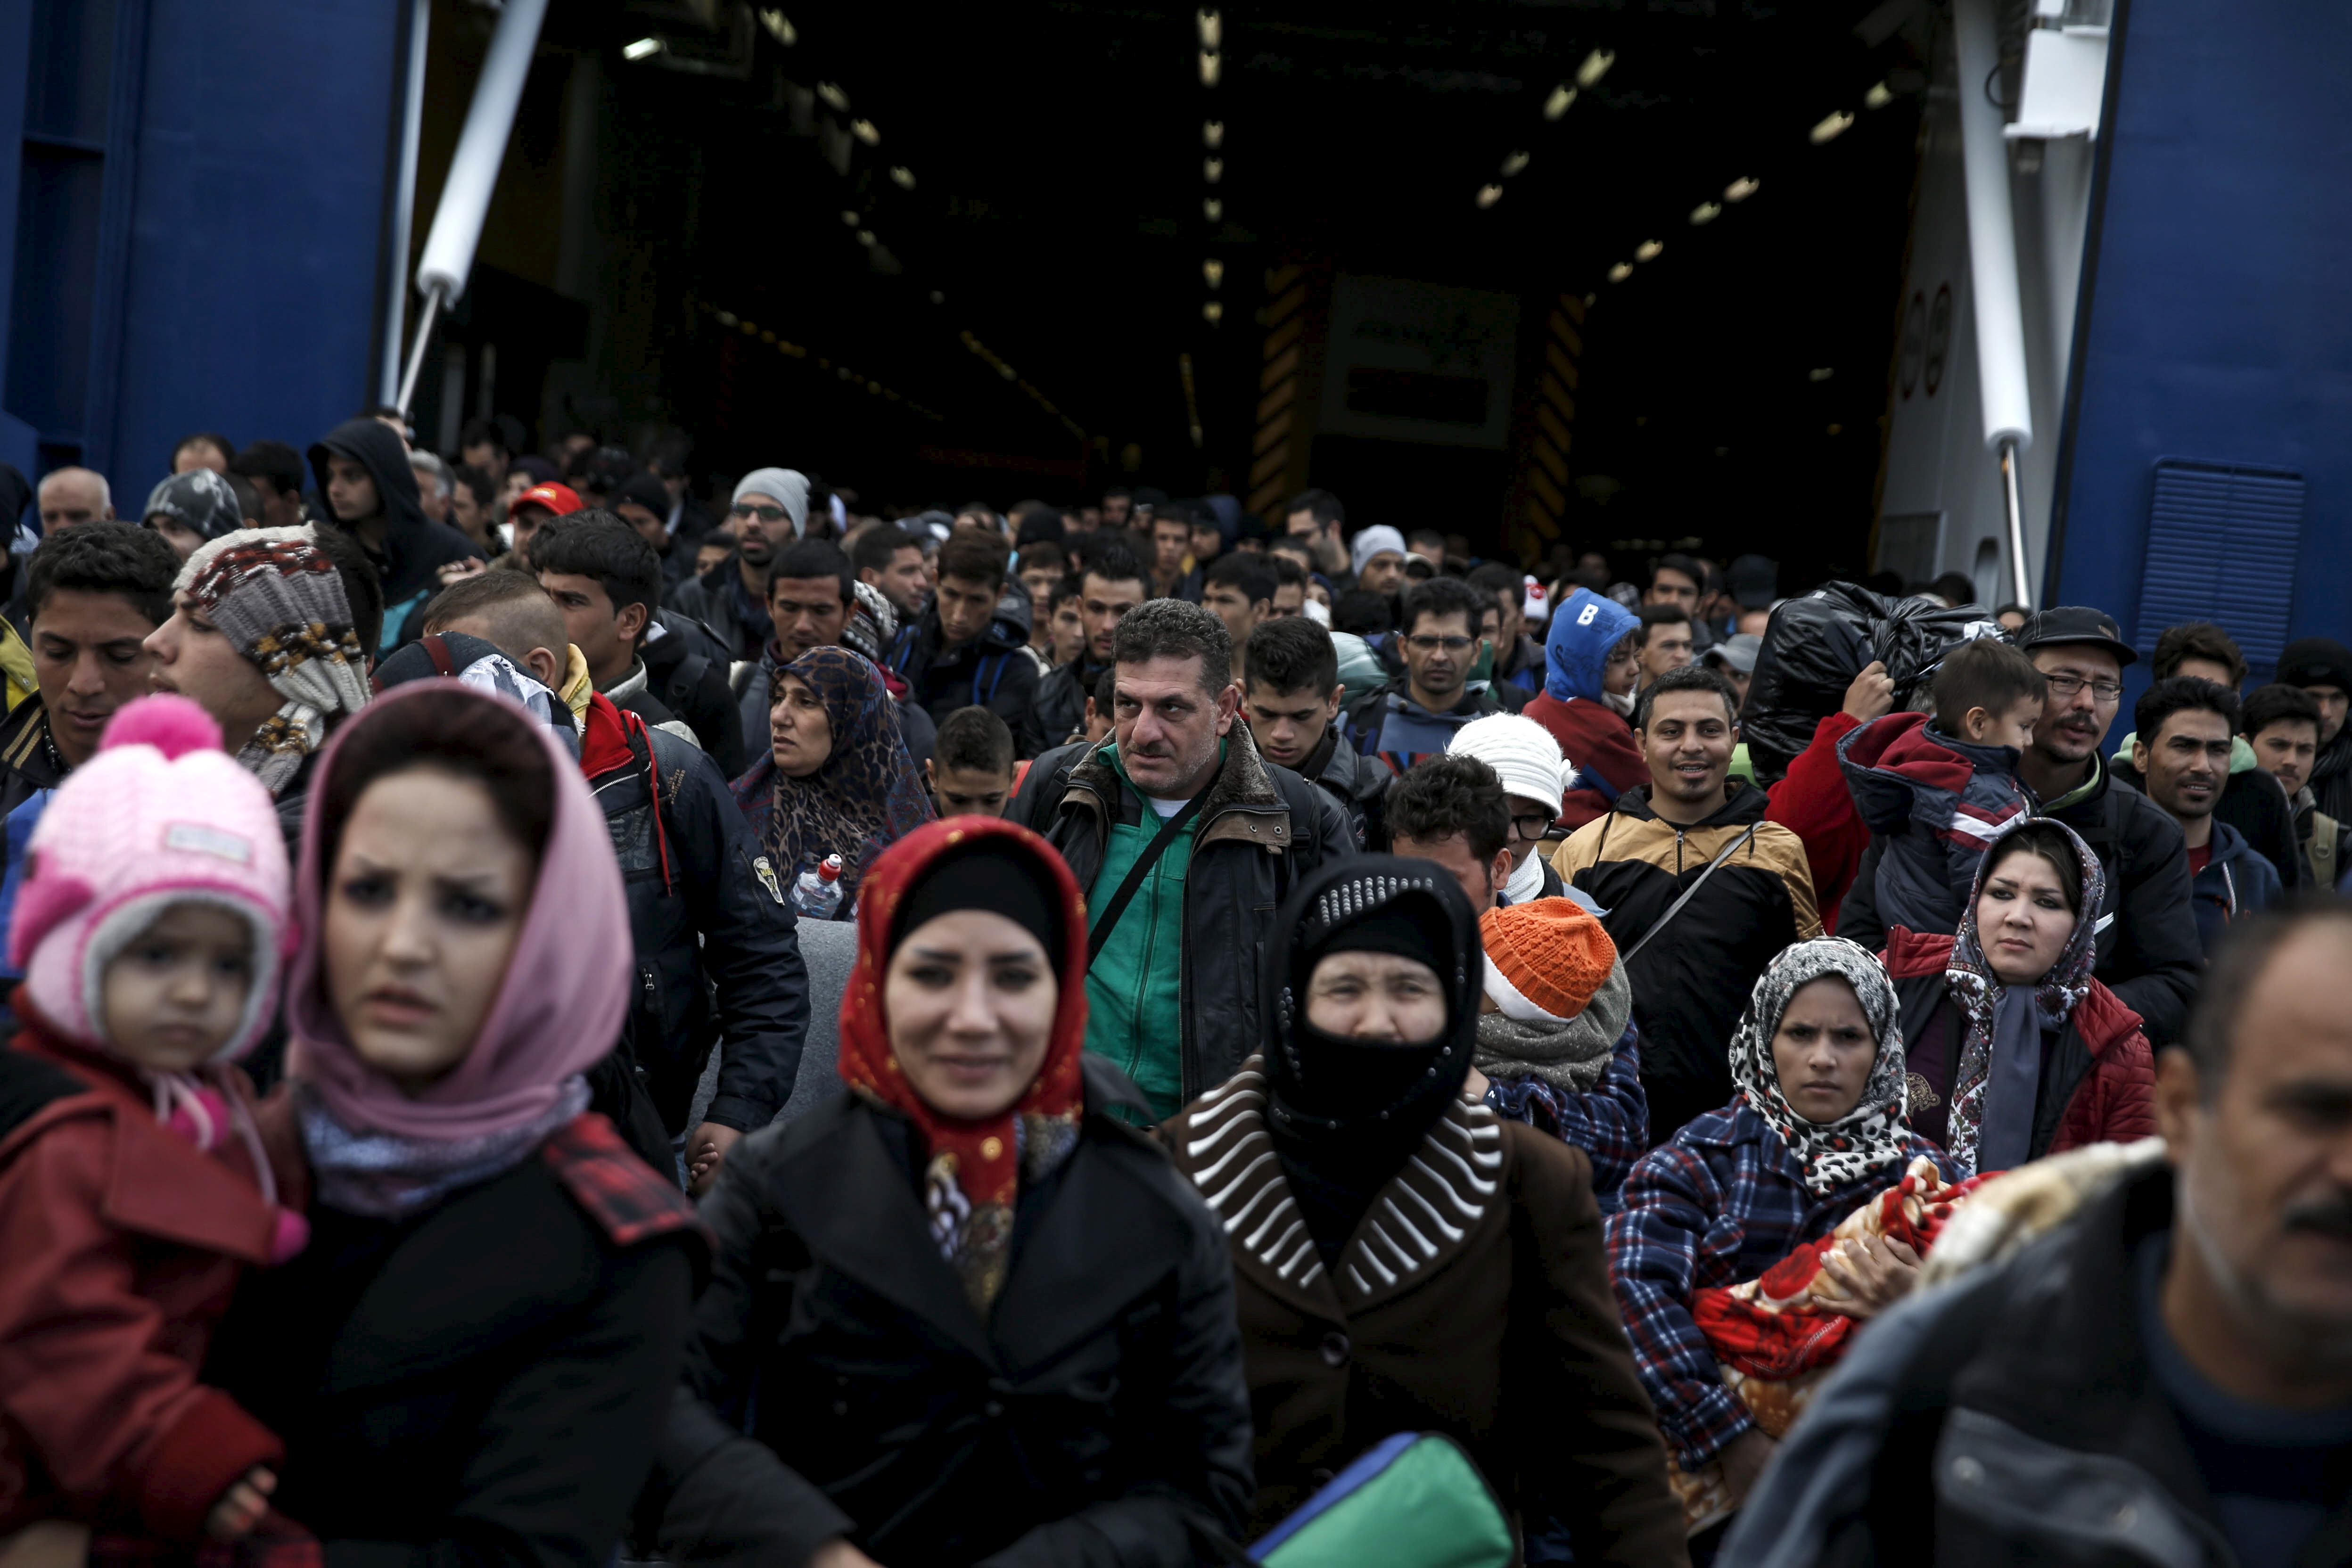 Refugees and migrants arrive in Greece.